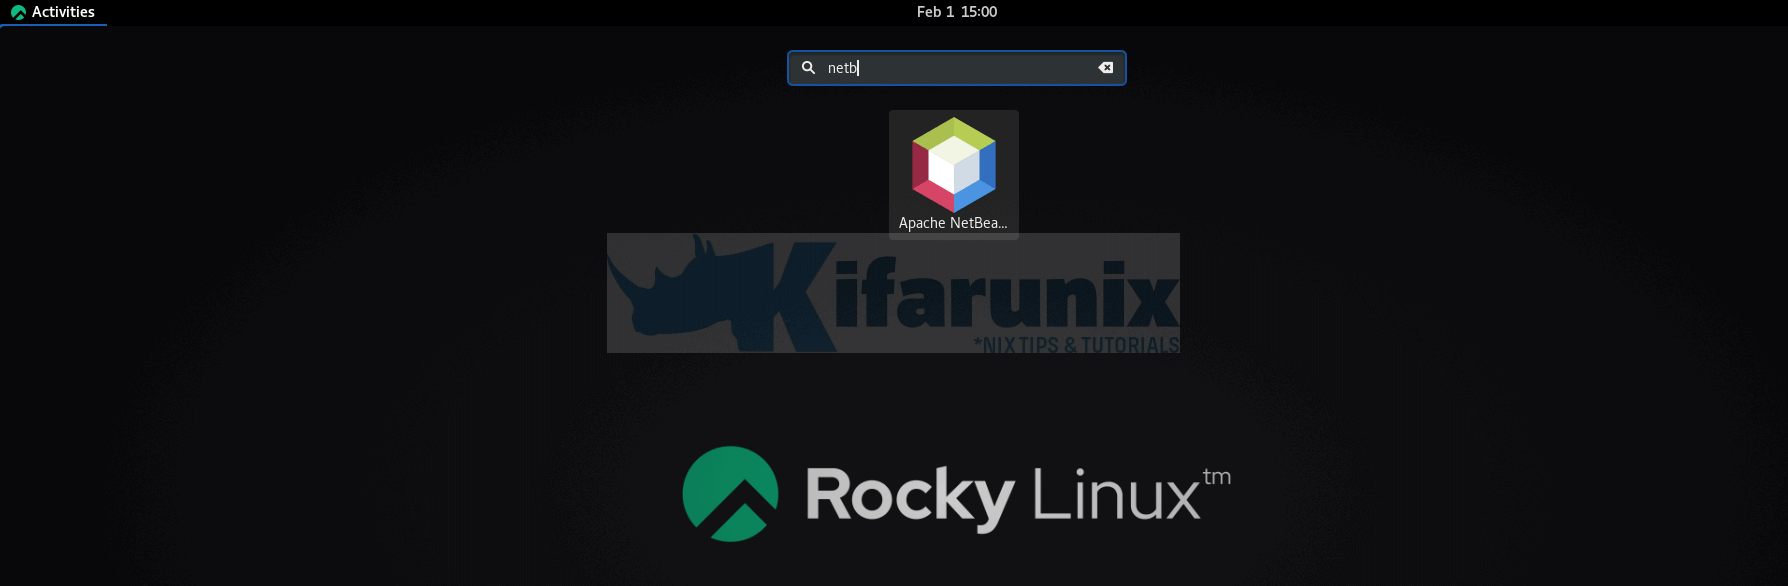 Install NetBeans IDE on Rocky Linux 8